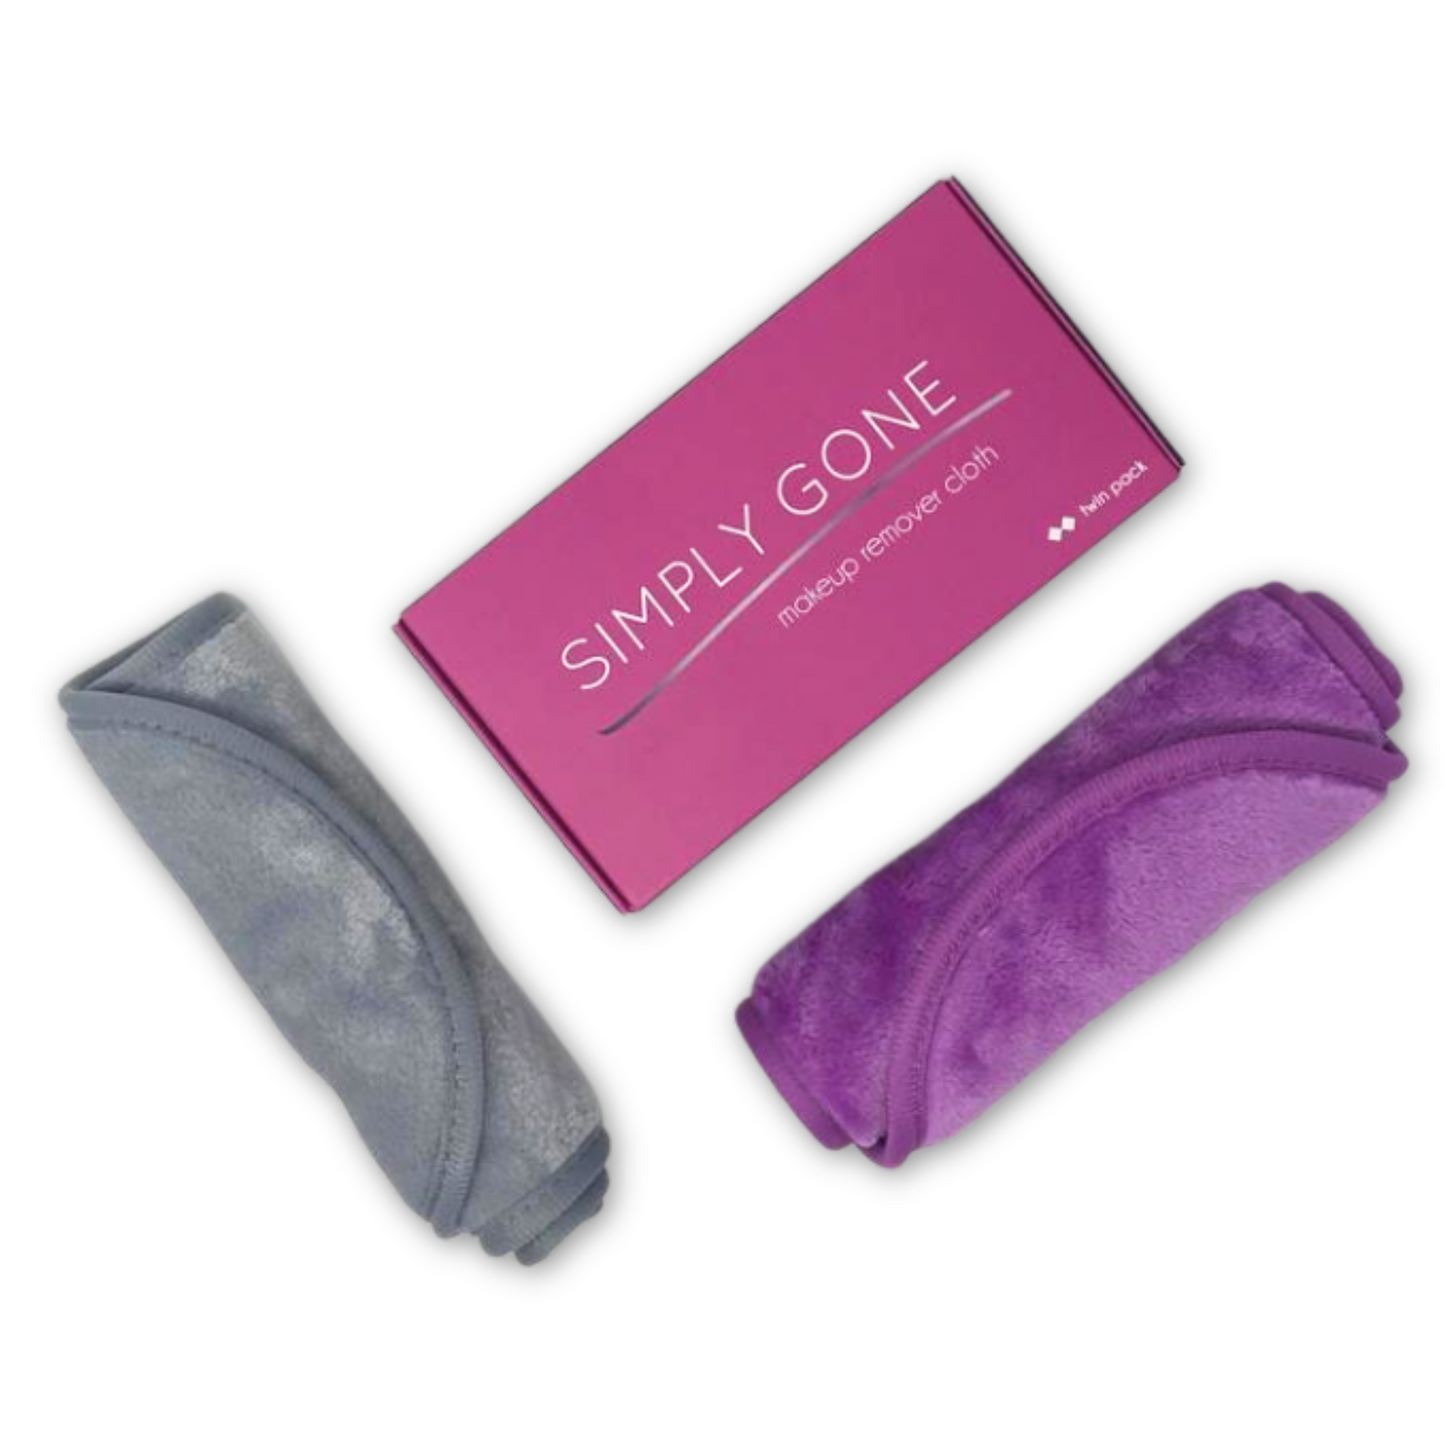 Simply Gone Makeup Remover Cloth - Set of 2 (Purple & Grey)